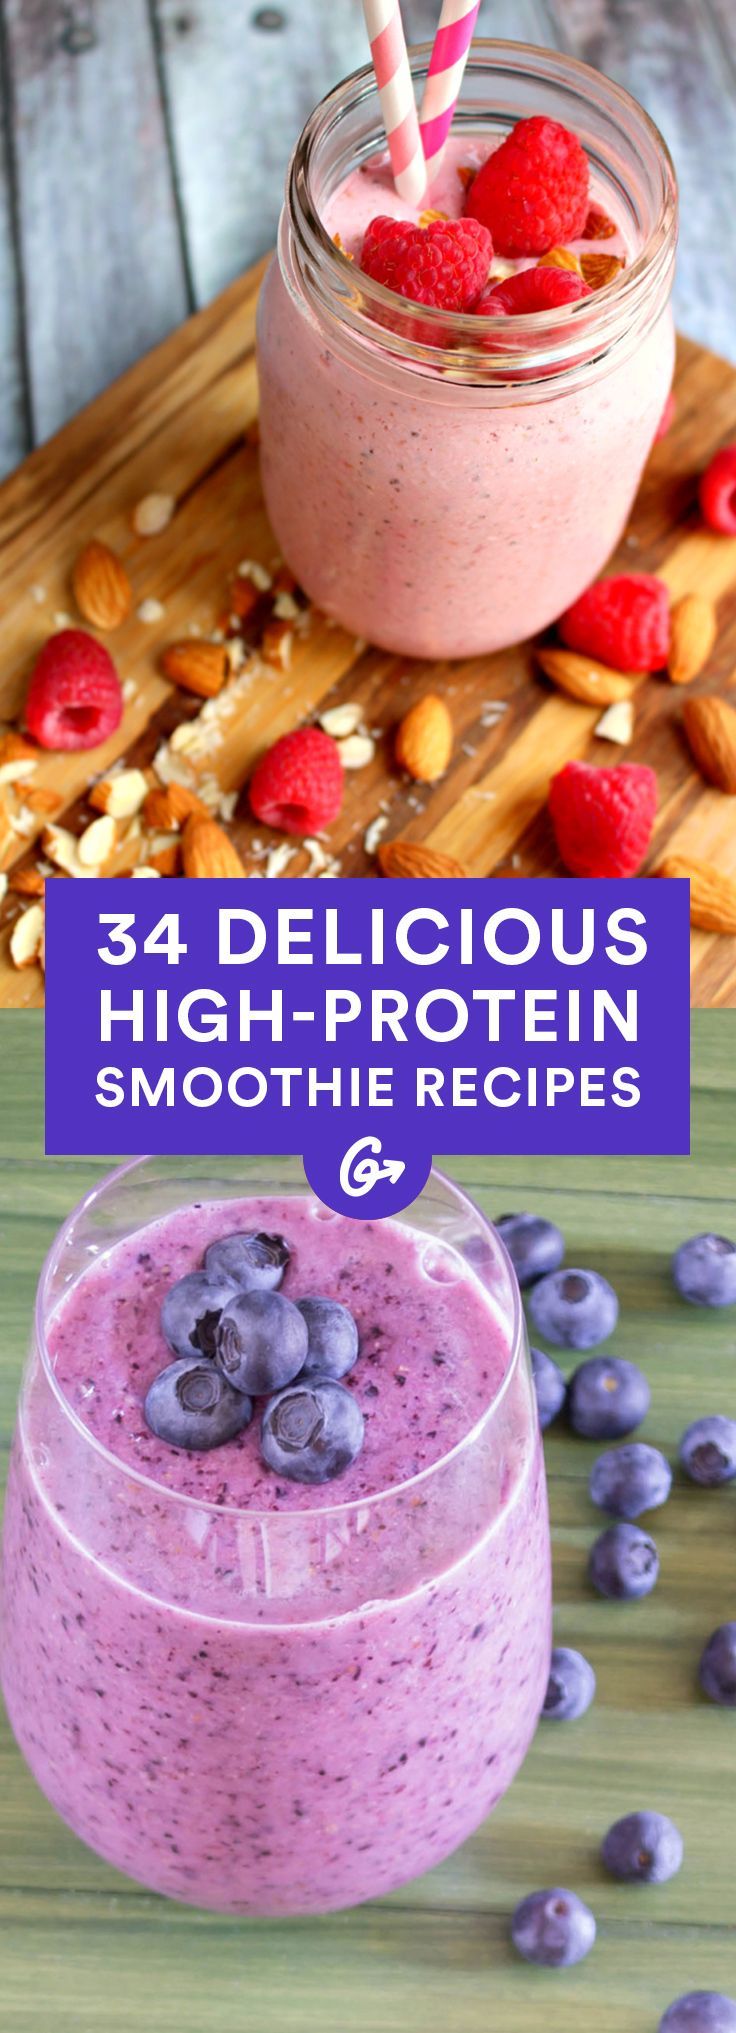 34 High-Protein Smoothie Recipes That Are Easy to Make -   24 breakfast smoothie recipes
 ideas